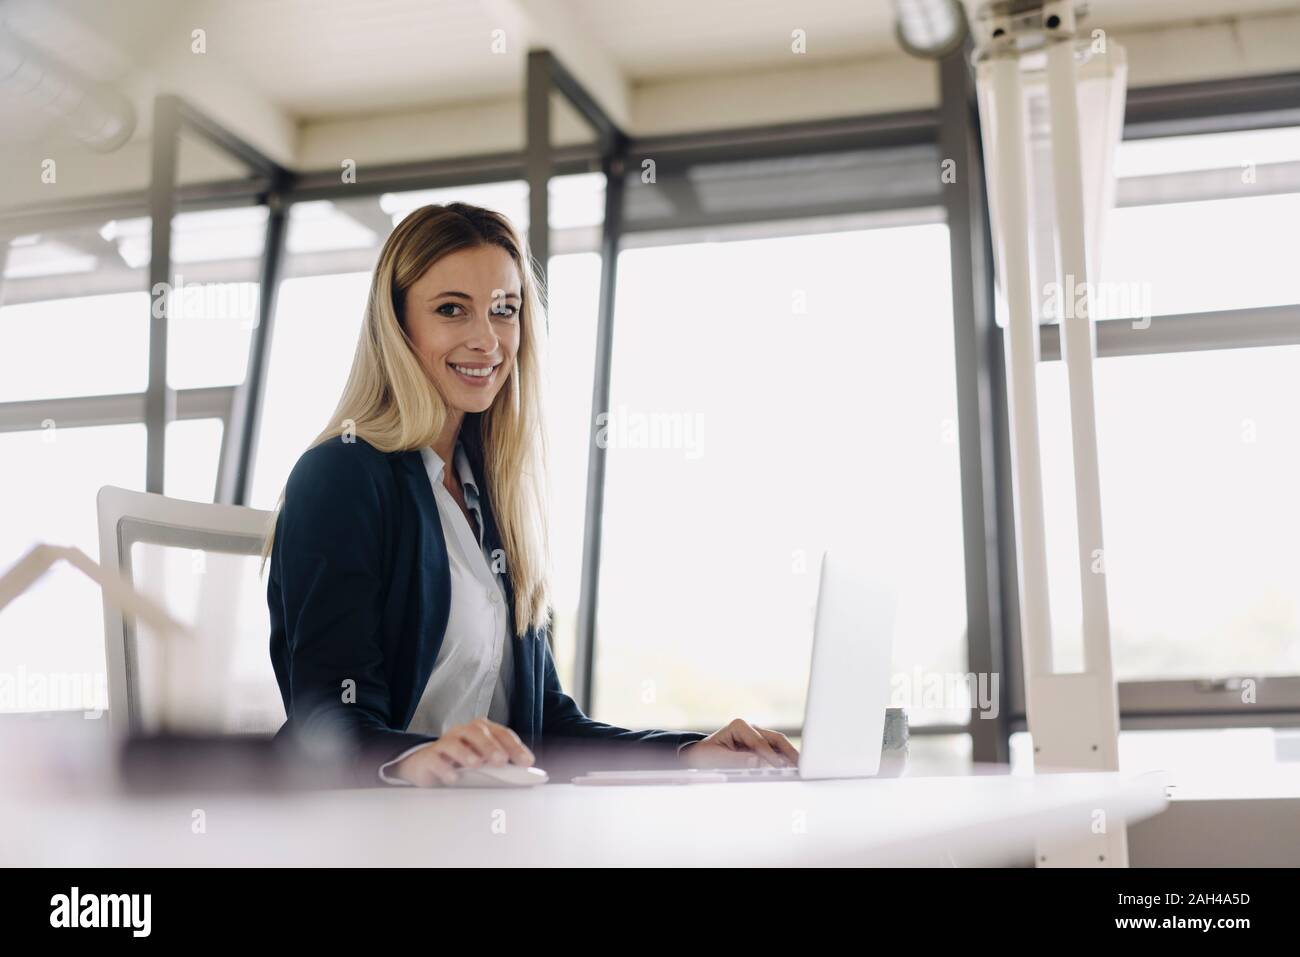 Portrait of a smiling young businesswoman using laptop at desk in office Stock Photo